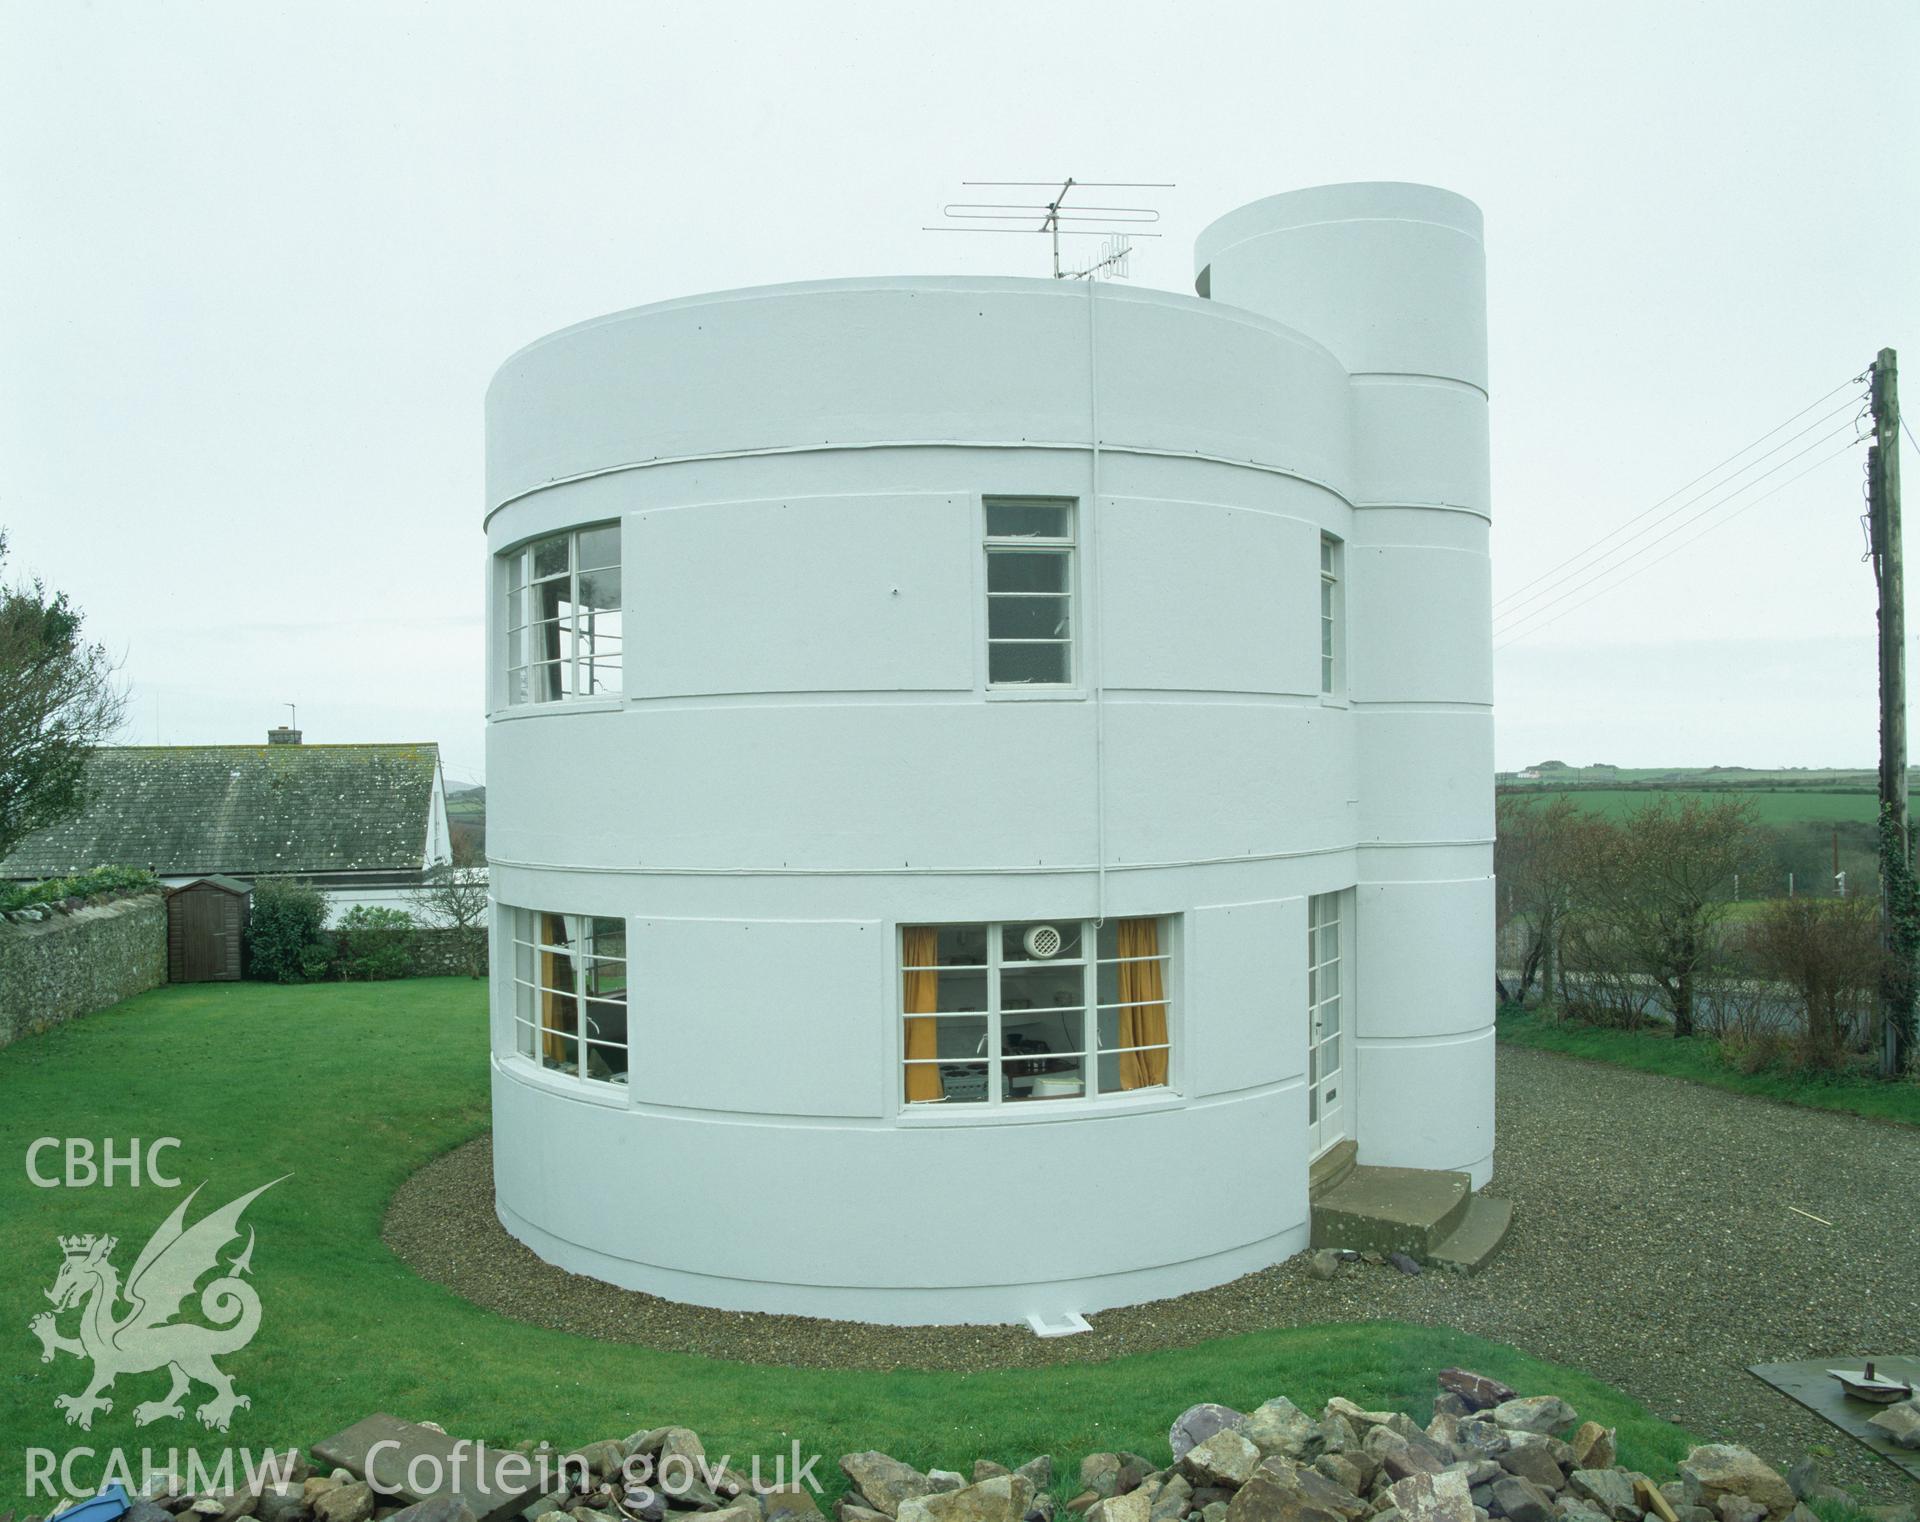 RCAHMW colour transparency showing the Round House, St Davids, taken by Iain Wright, 2003.